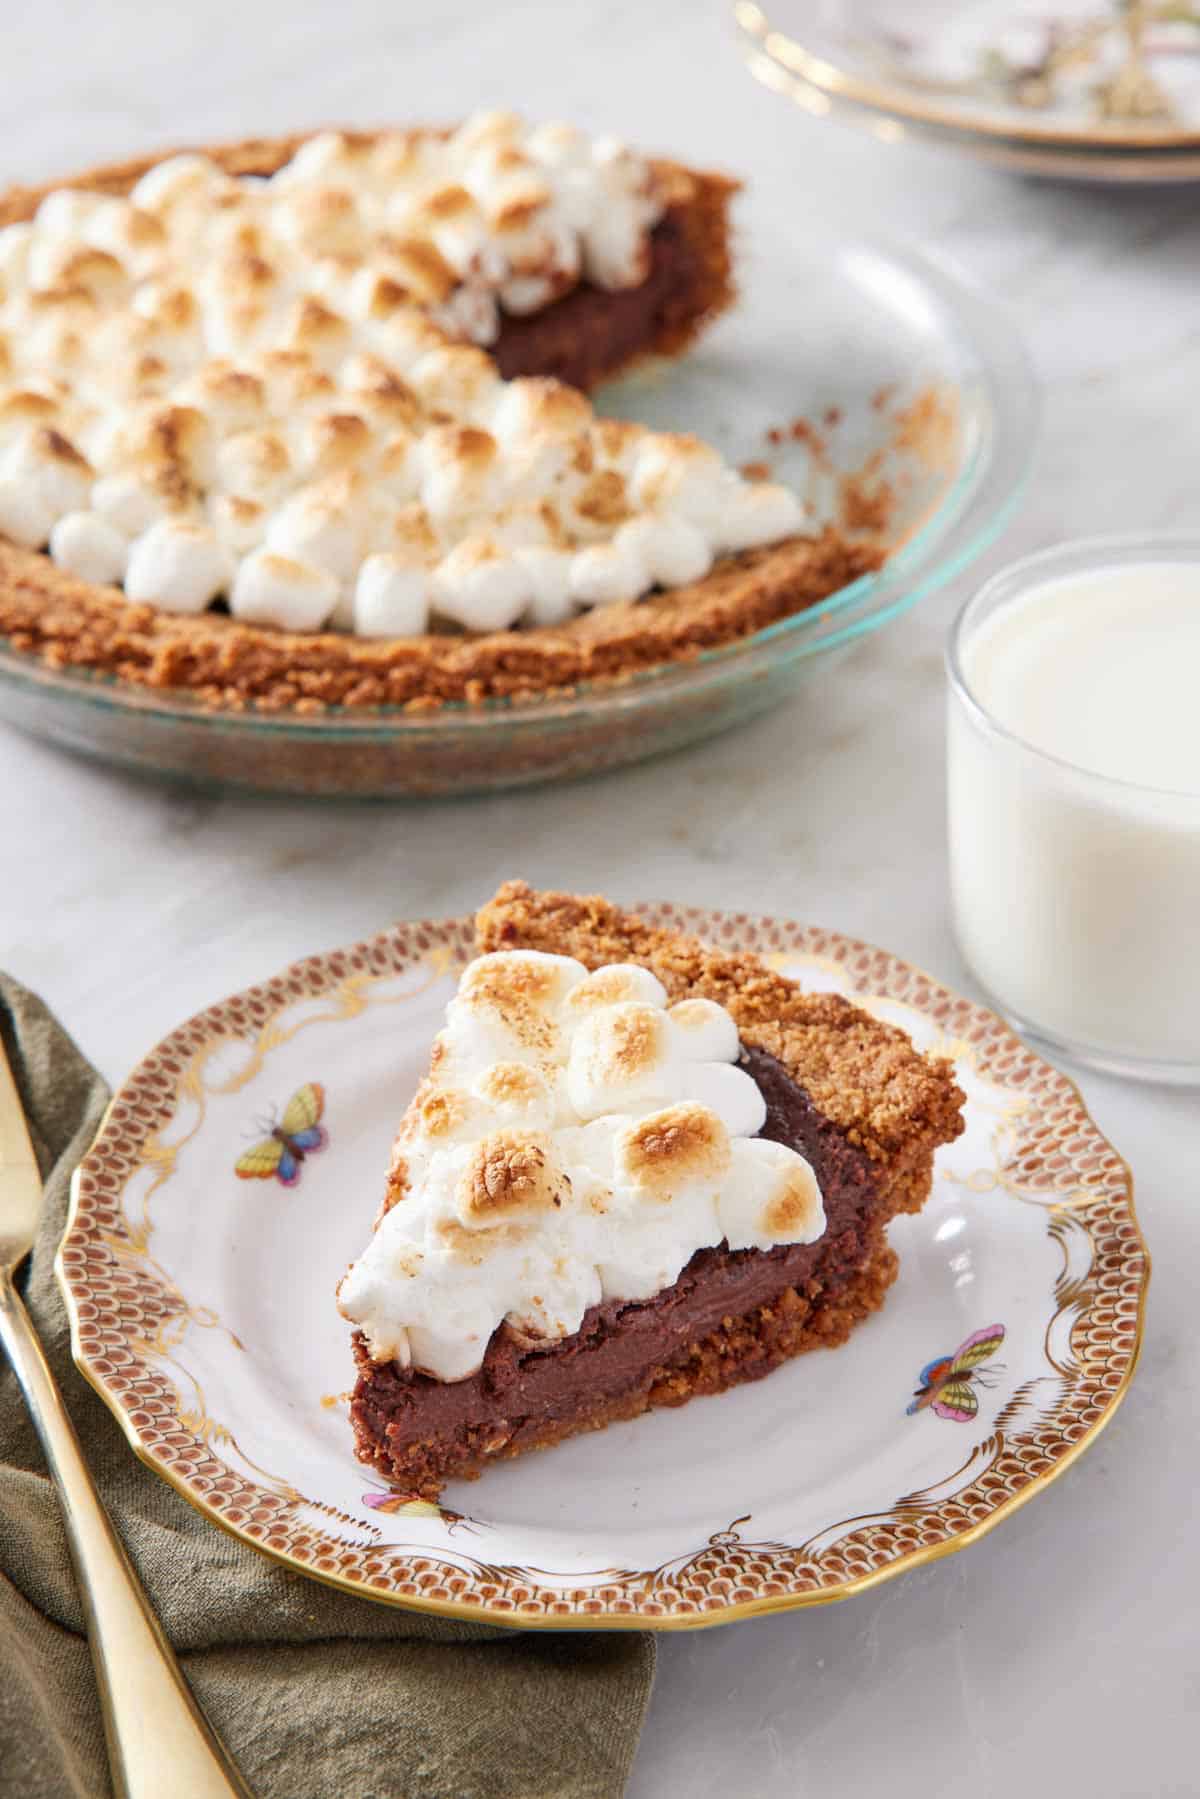 A slice of s'more pie with a glass of milk and the rest of the pie in the background.